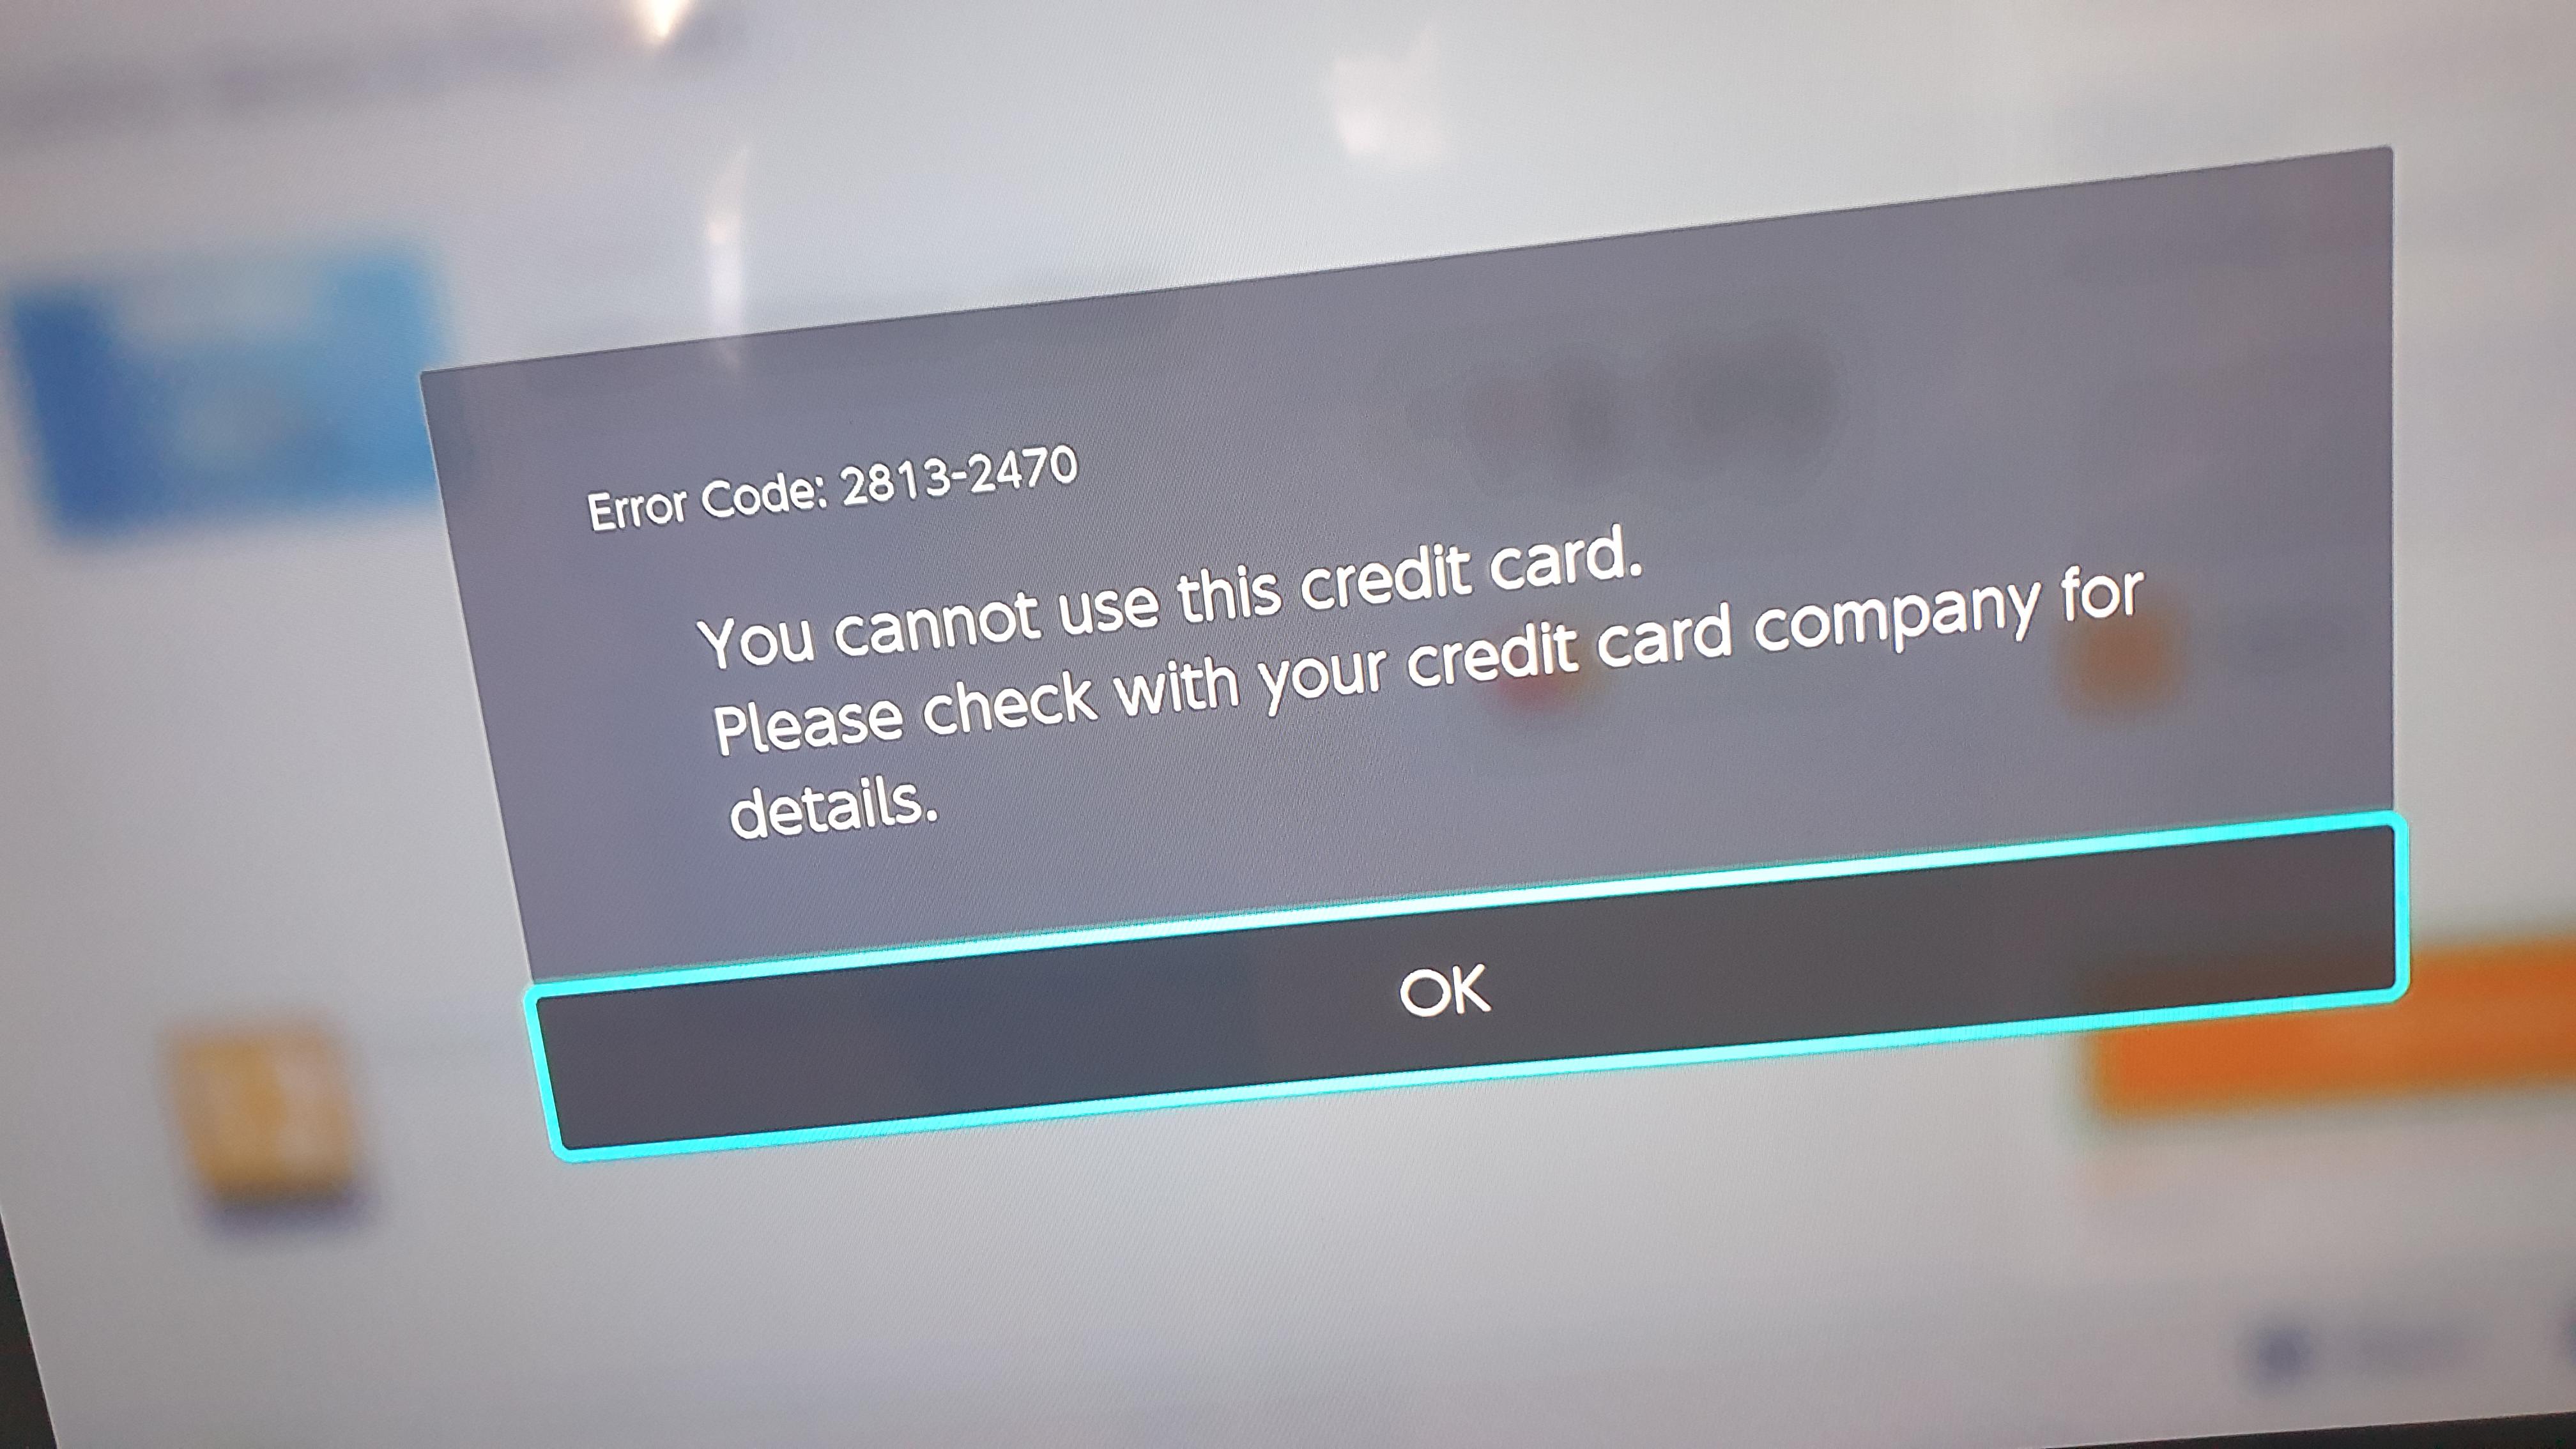 how to fix nintendo switch game card error